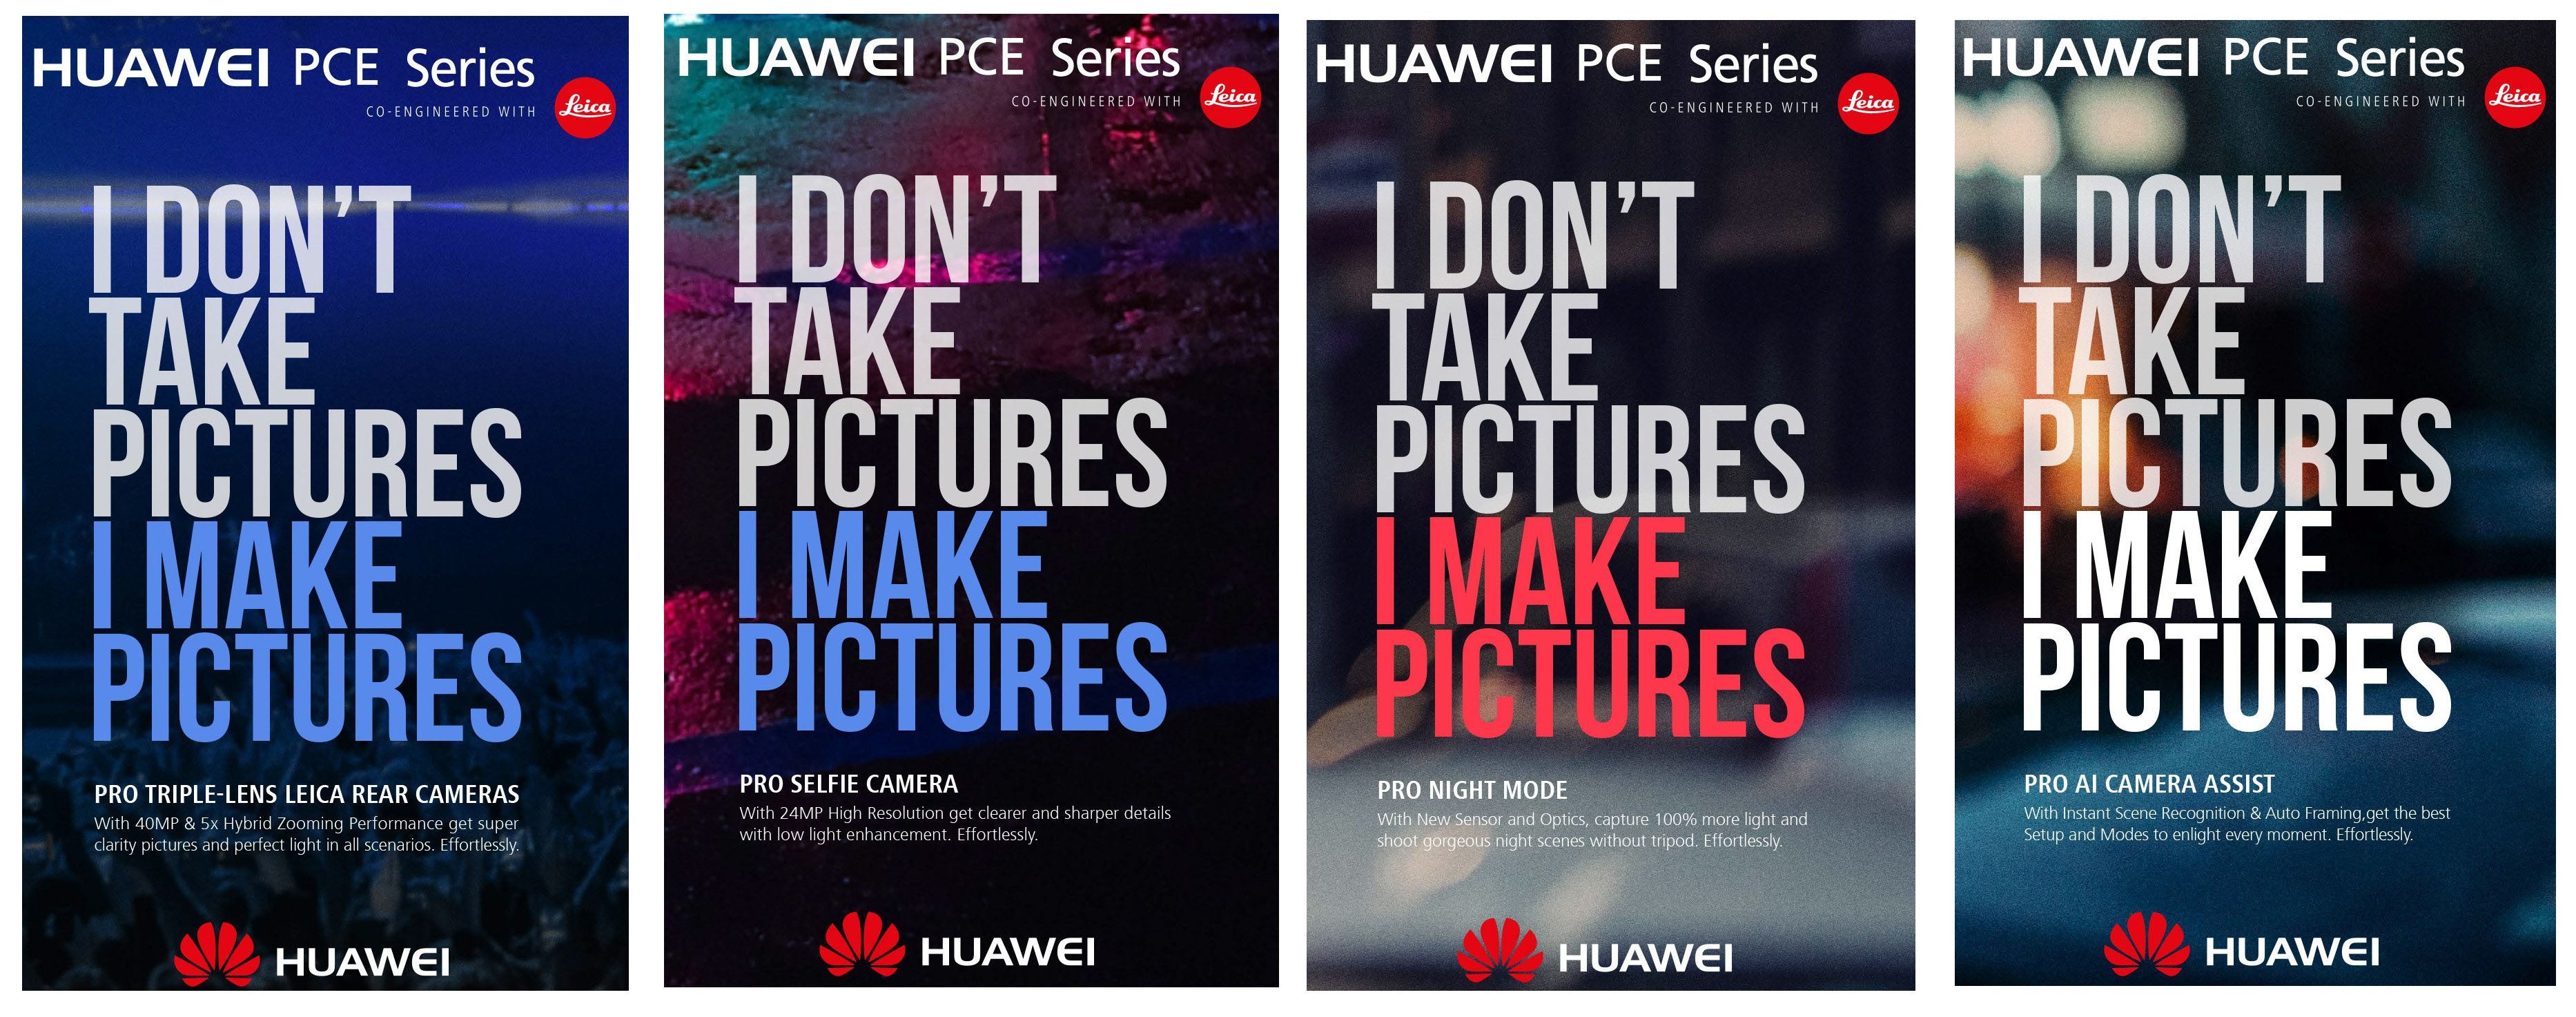 A bunch of leaked posters give us hints of what to expect - Huawei P20 (Huawei P11?) rumor review: triple cameras, Face ID, bezels begone